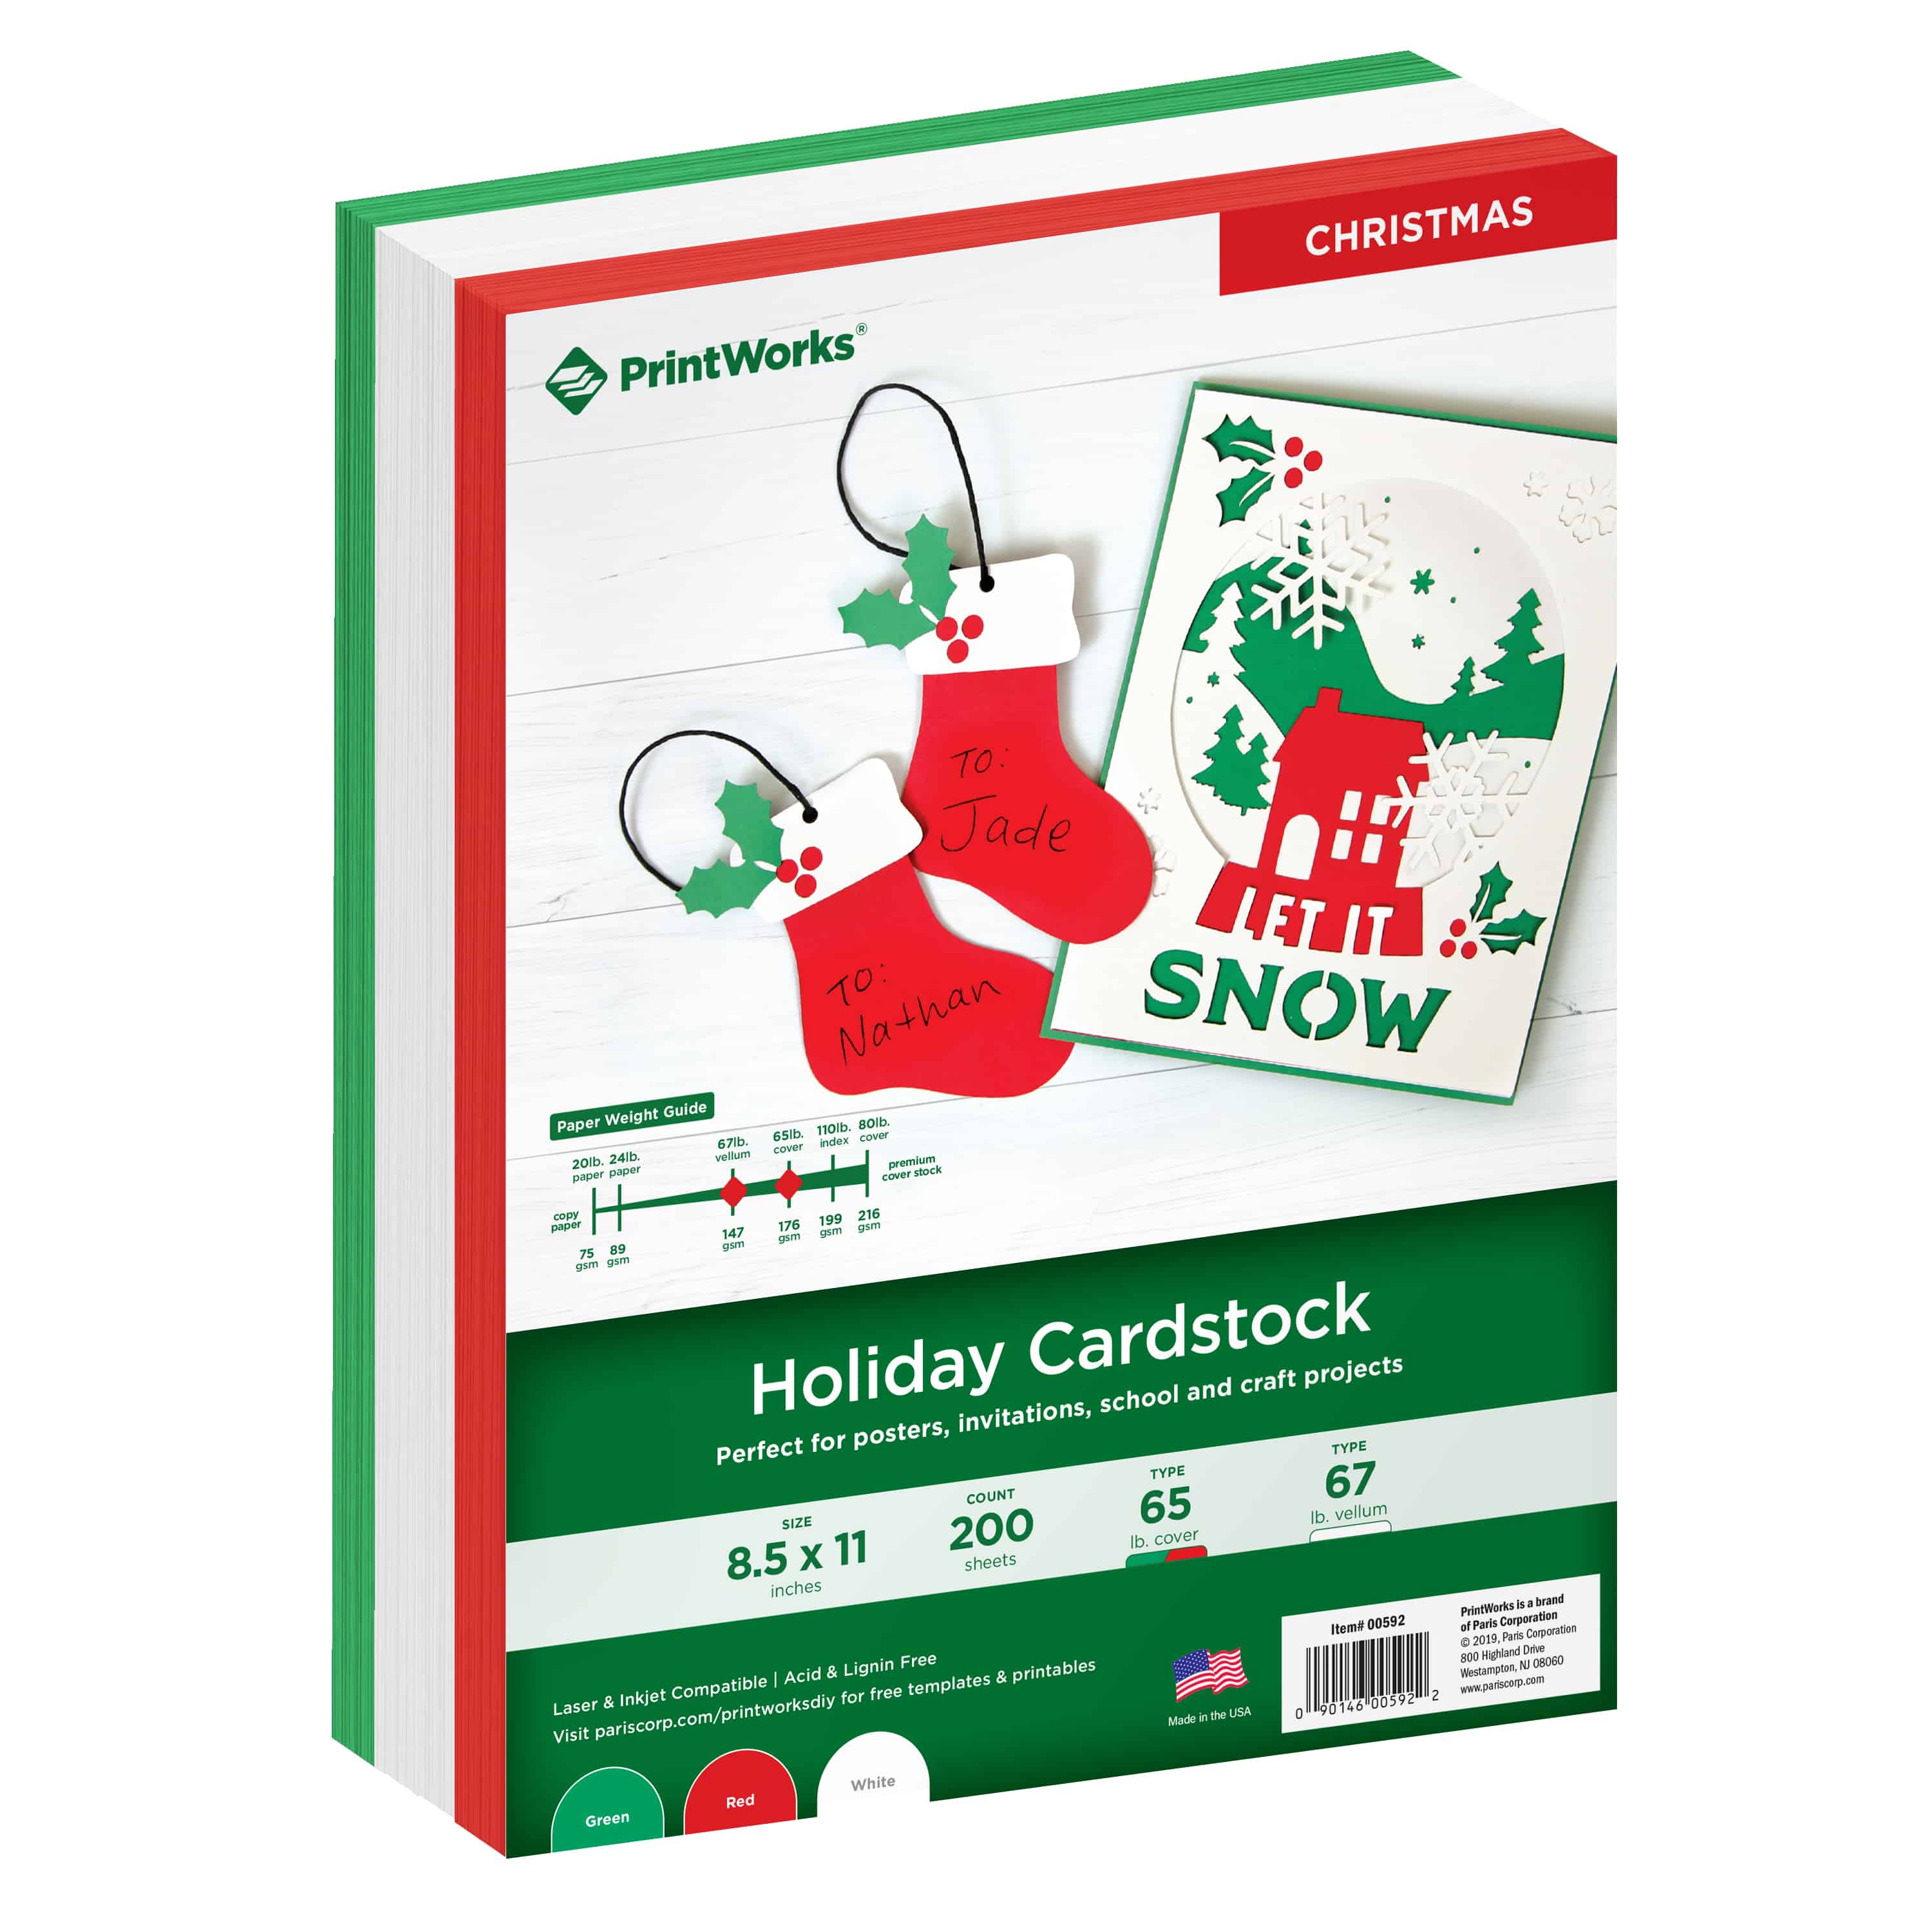 holiday crafts, cardstock, card stock, red cardstock, green cardstock, white cardstock, DIY cards, holiday gifts, Christmas crafts, Christmas decorations